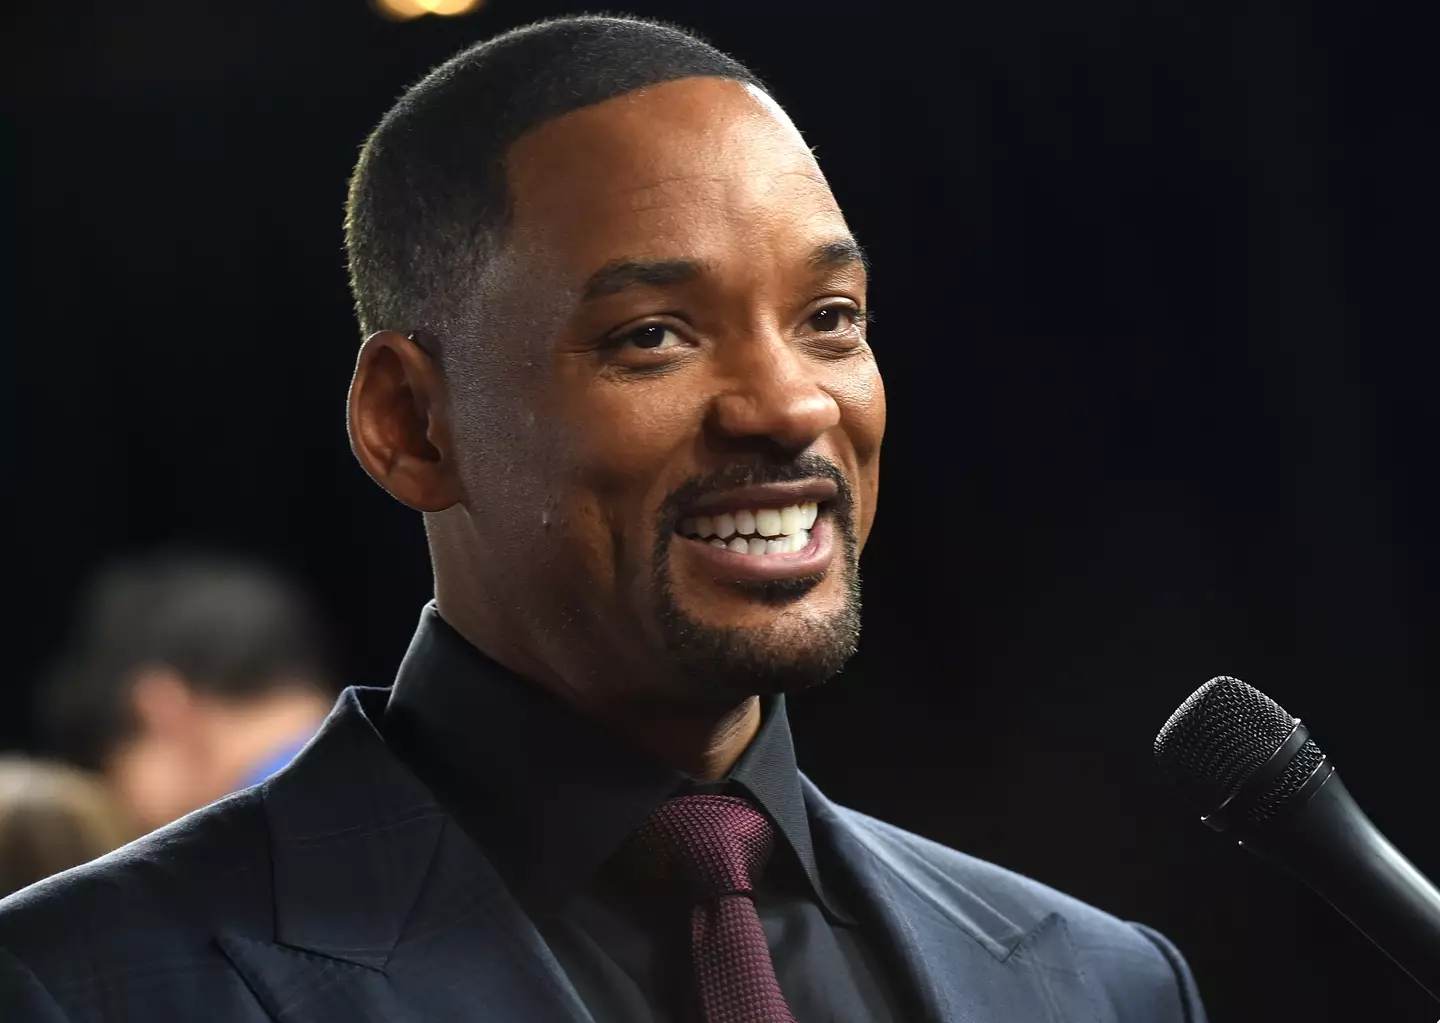 Will Smith opened up about his sex life in his self-titled memoir.